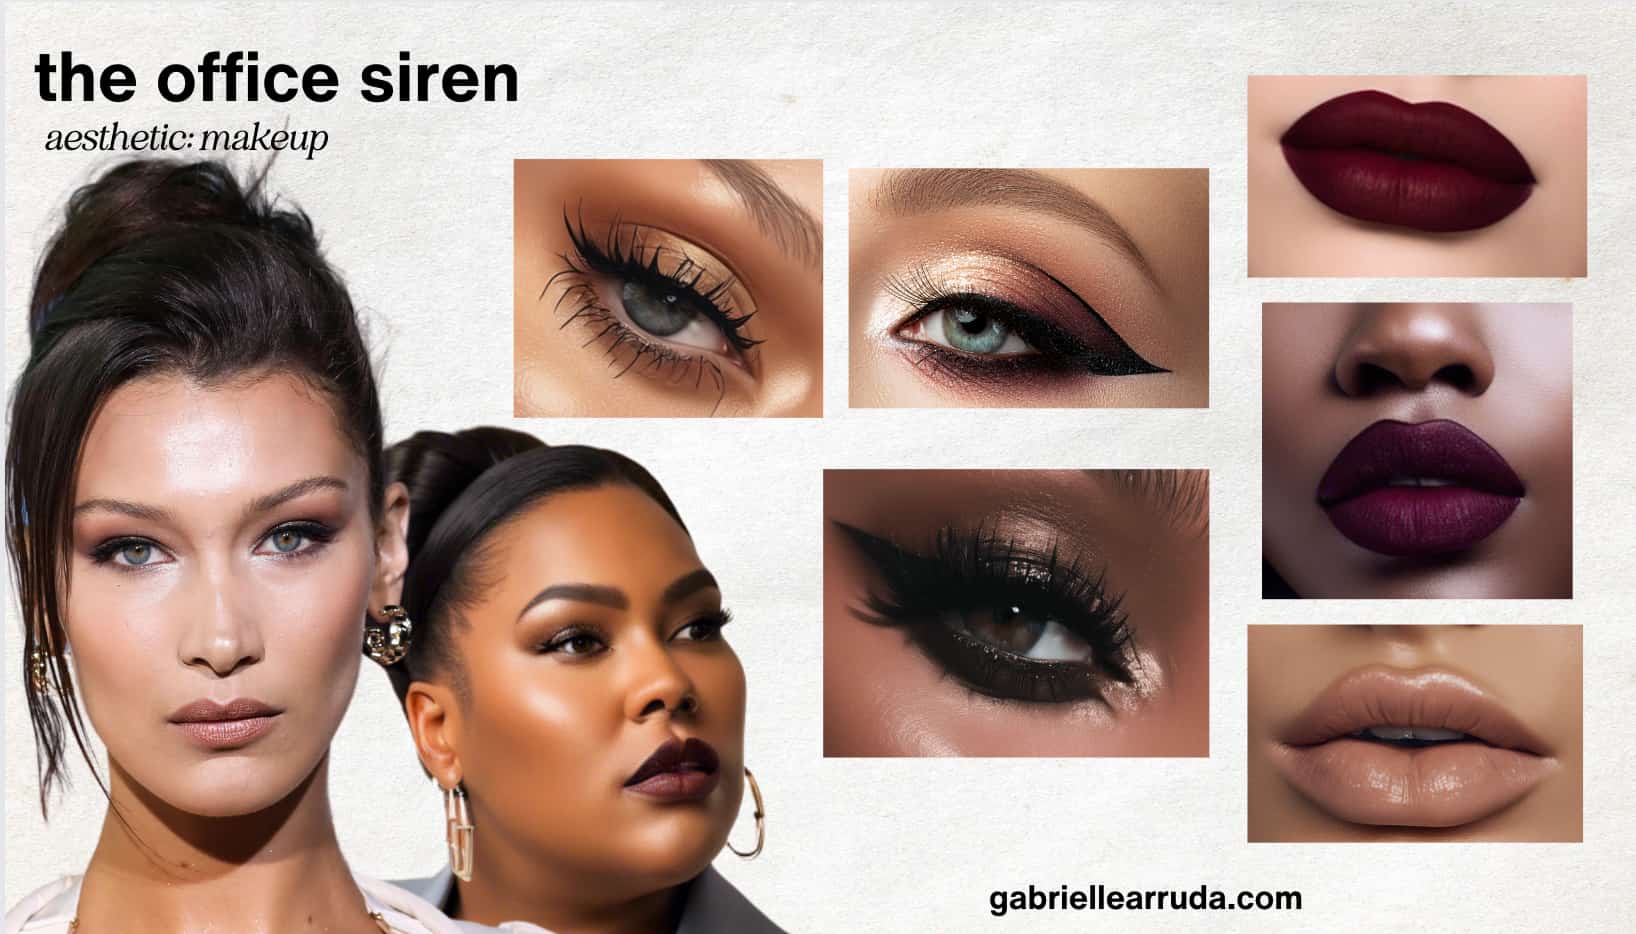 office siren makeup with bella hadid and black wom with siren makeup and individual eye and lip ideas